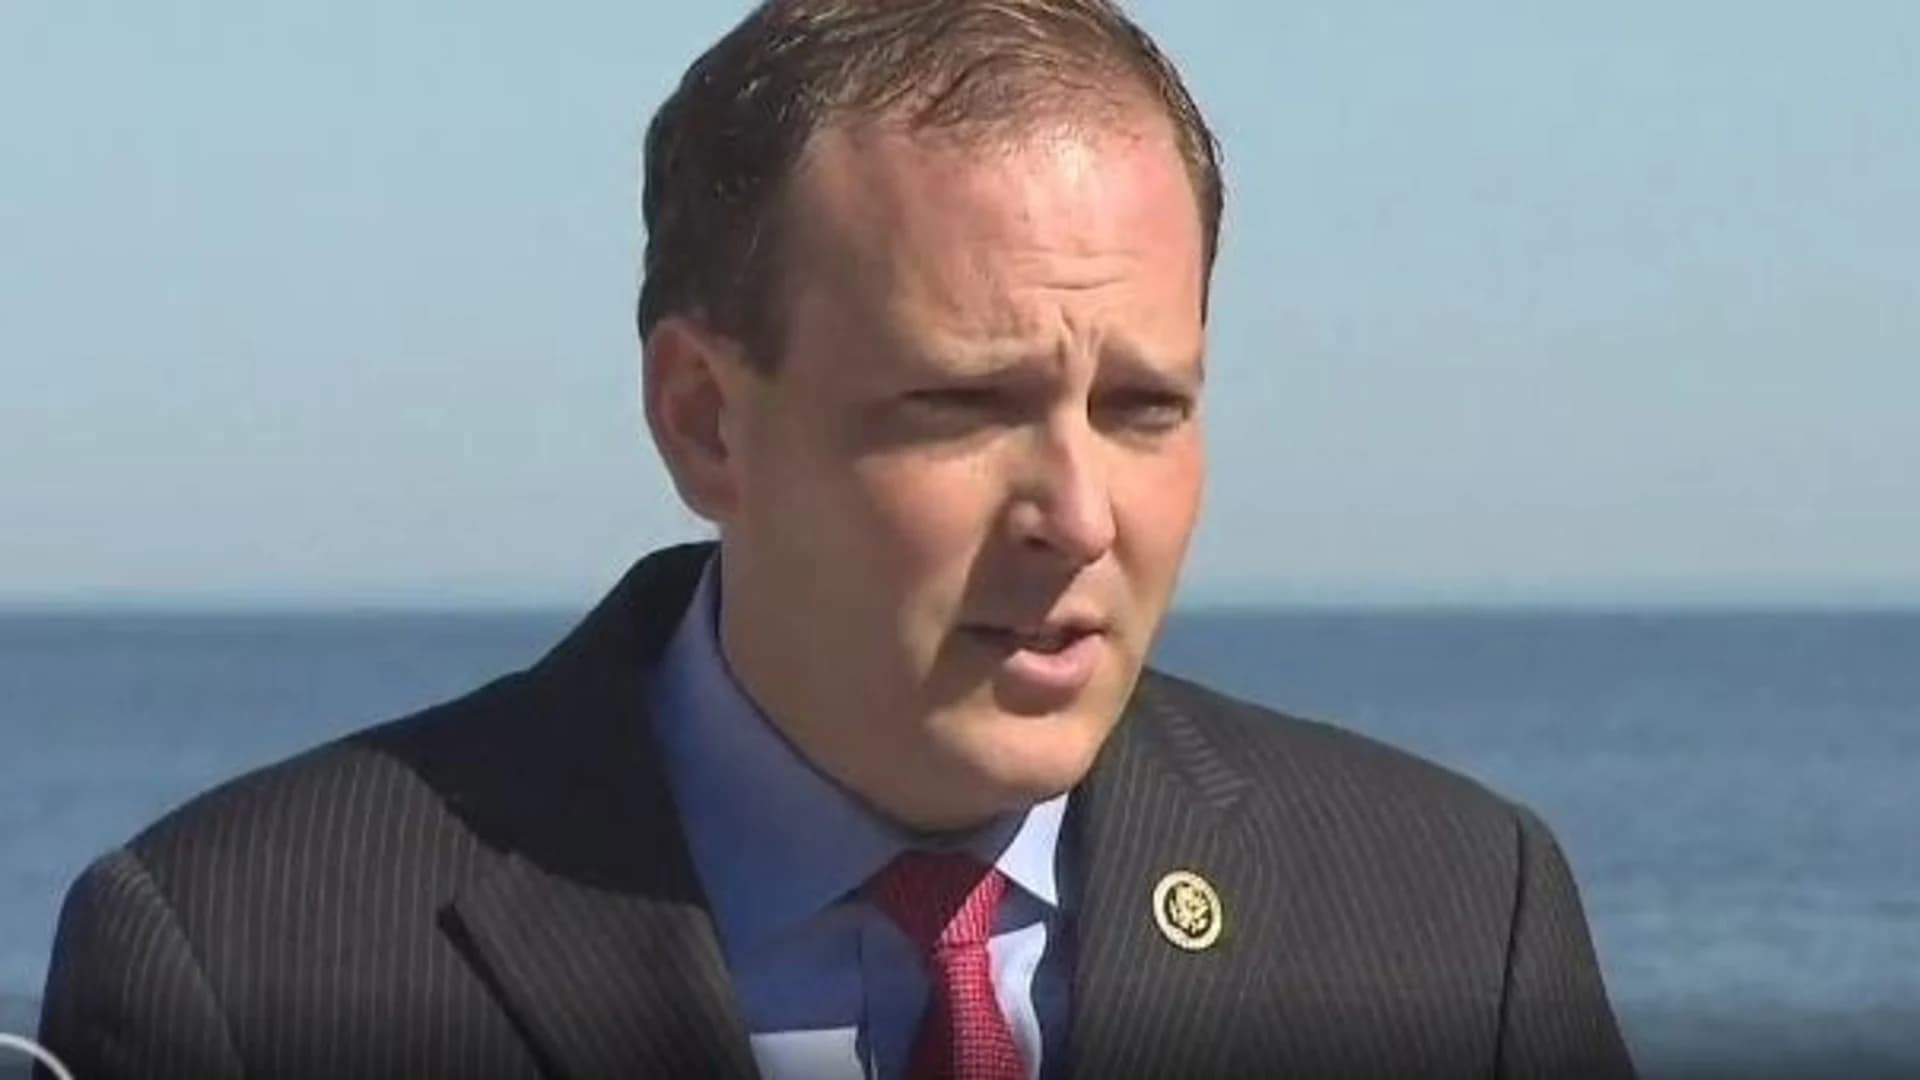 Groups push for Rep. Zeldin's removal from Holocaust council